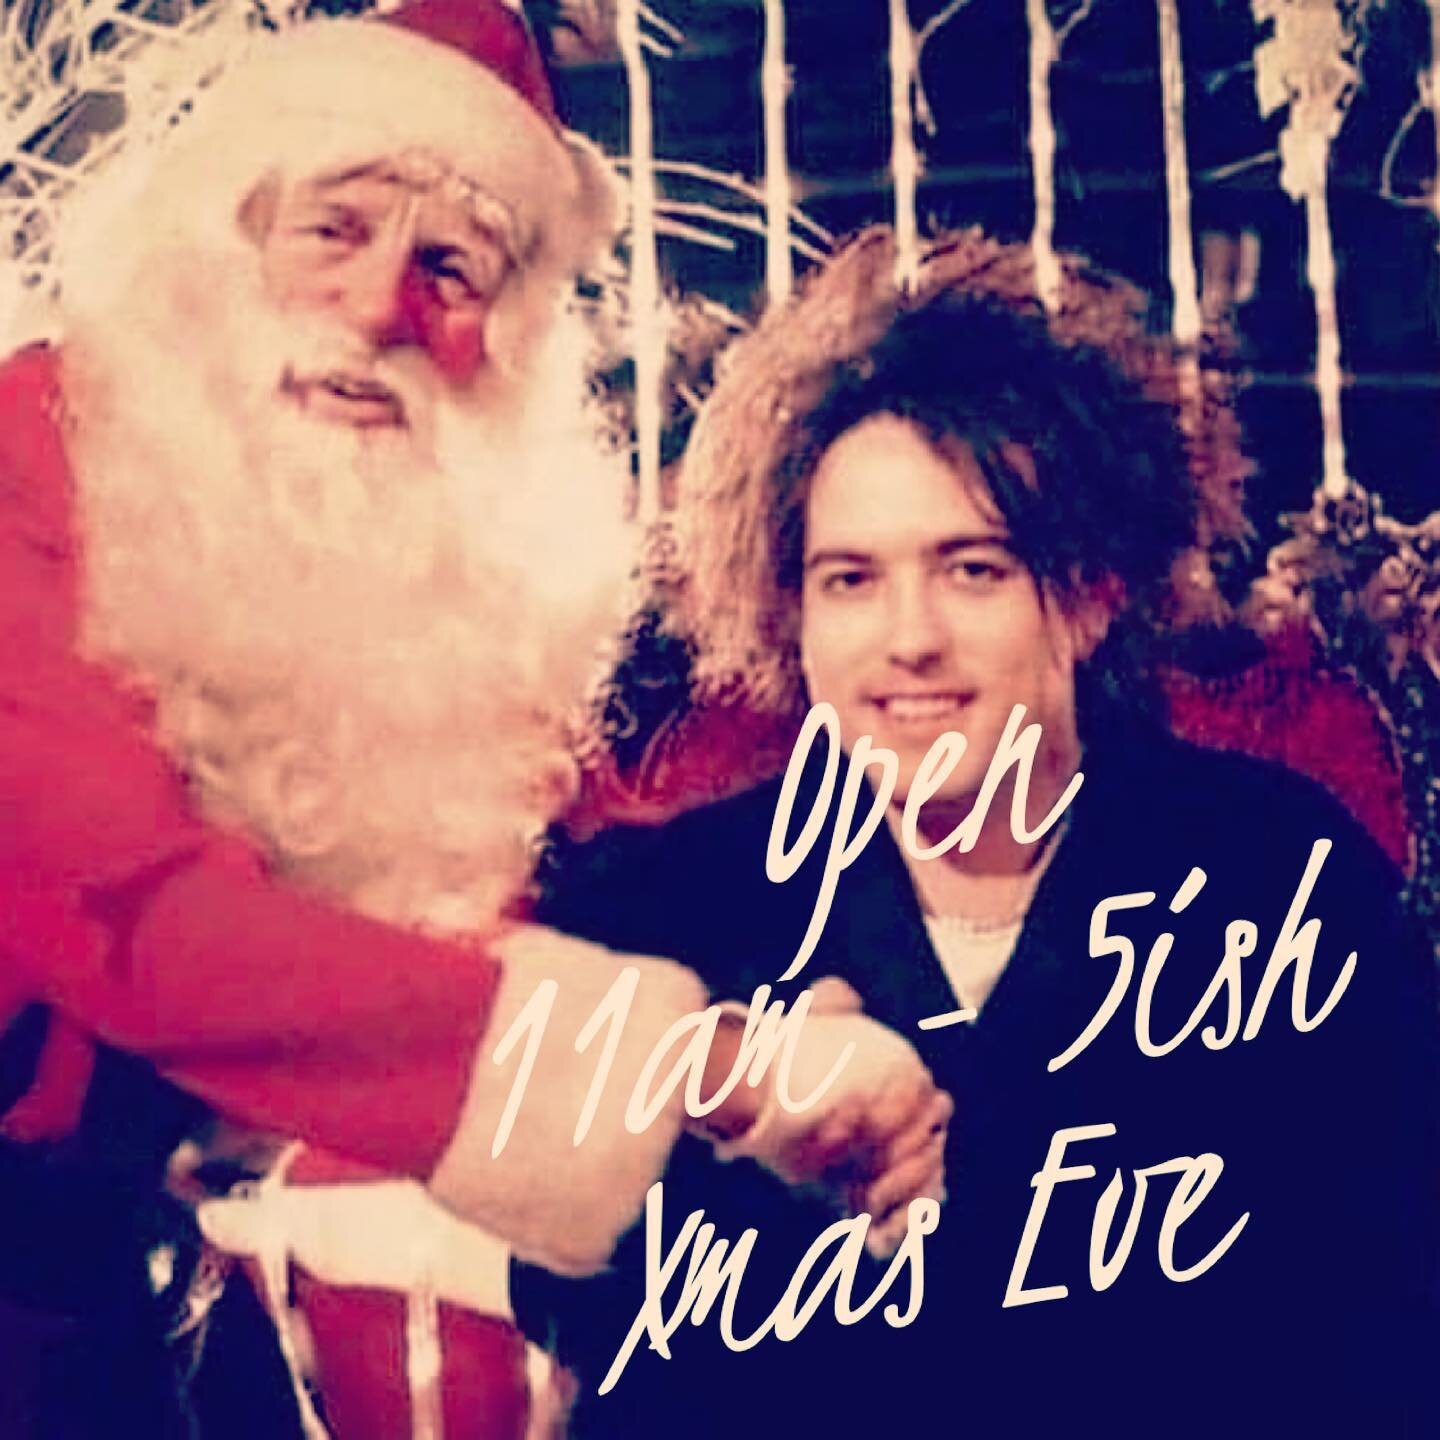 We&rsquo;ll be open 11-5pm on Xmas eve.  Bins are loaded.  Come dig.  #xmas #thecure #robertsmith #recordstore #downtownstpete #shopstpete #keepstpetelocal #grandcentraldistrict #stpetersburgflorida #xmasshopping #vinylrecords #emo #punk